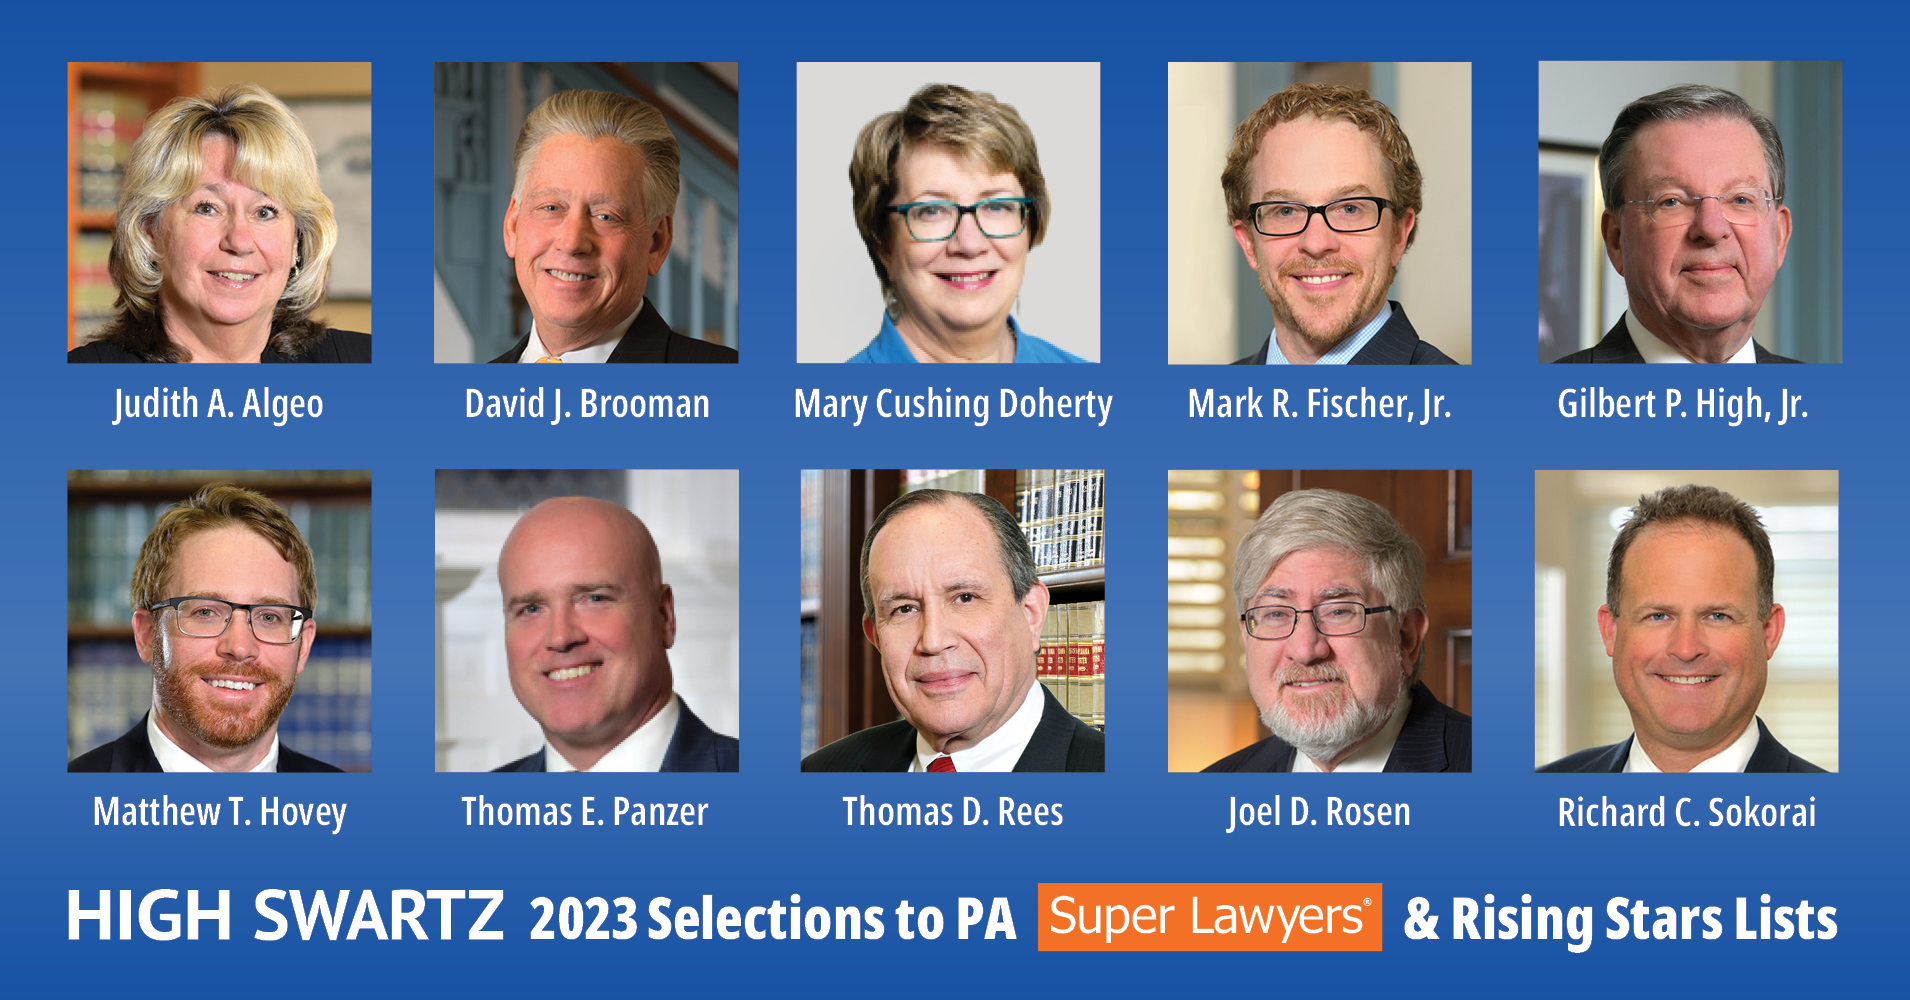 10 High Swartz Attorneys named to 2023 PA Super Lawyers® and Rising Stars Lists